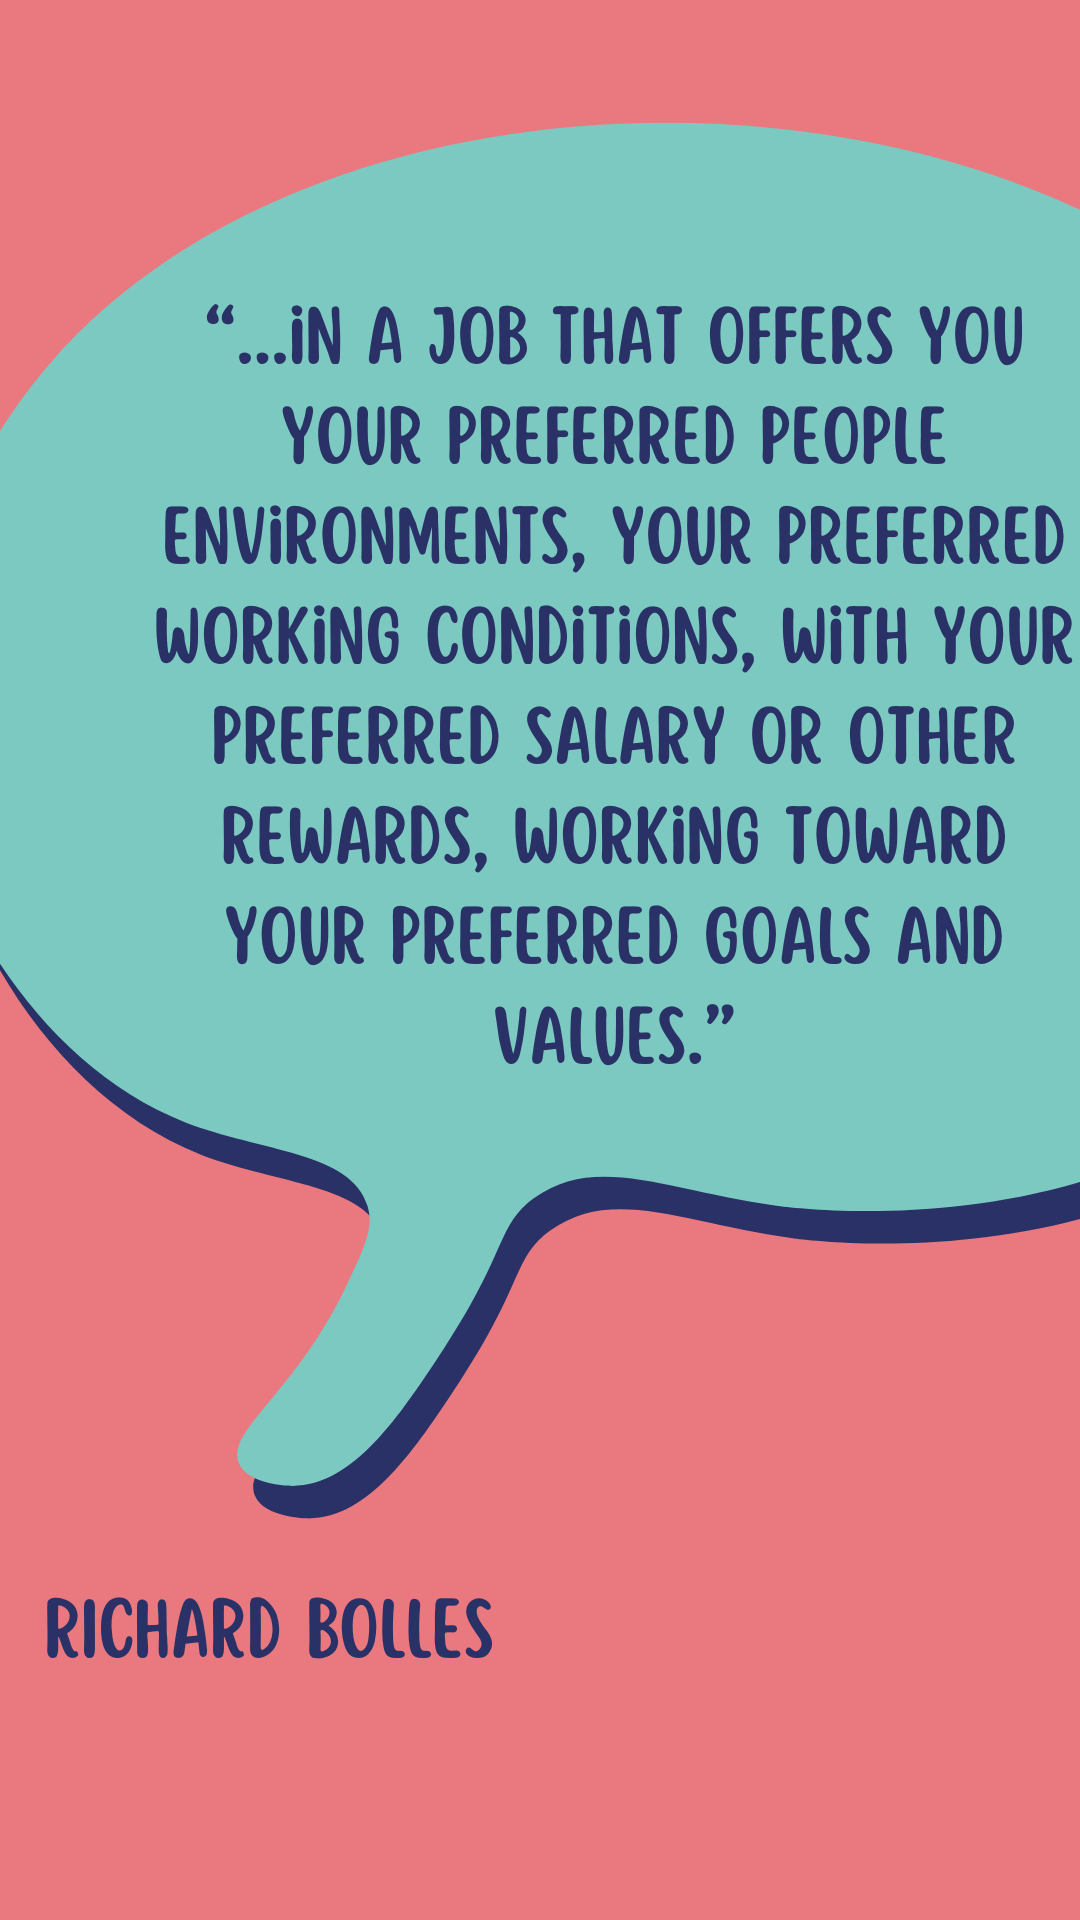 “...in a job that offers you your preferred people environments, your preferred working conditions, with your preferred salary or other rewards, working toward your preferred goals and values,” Bolles concludes.